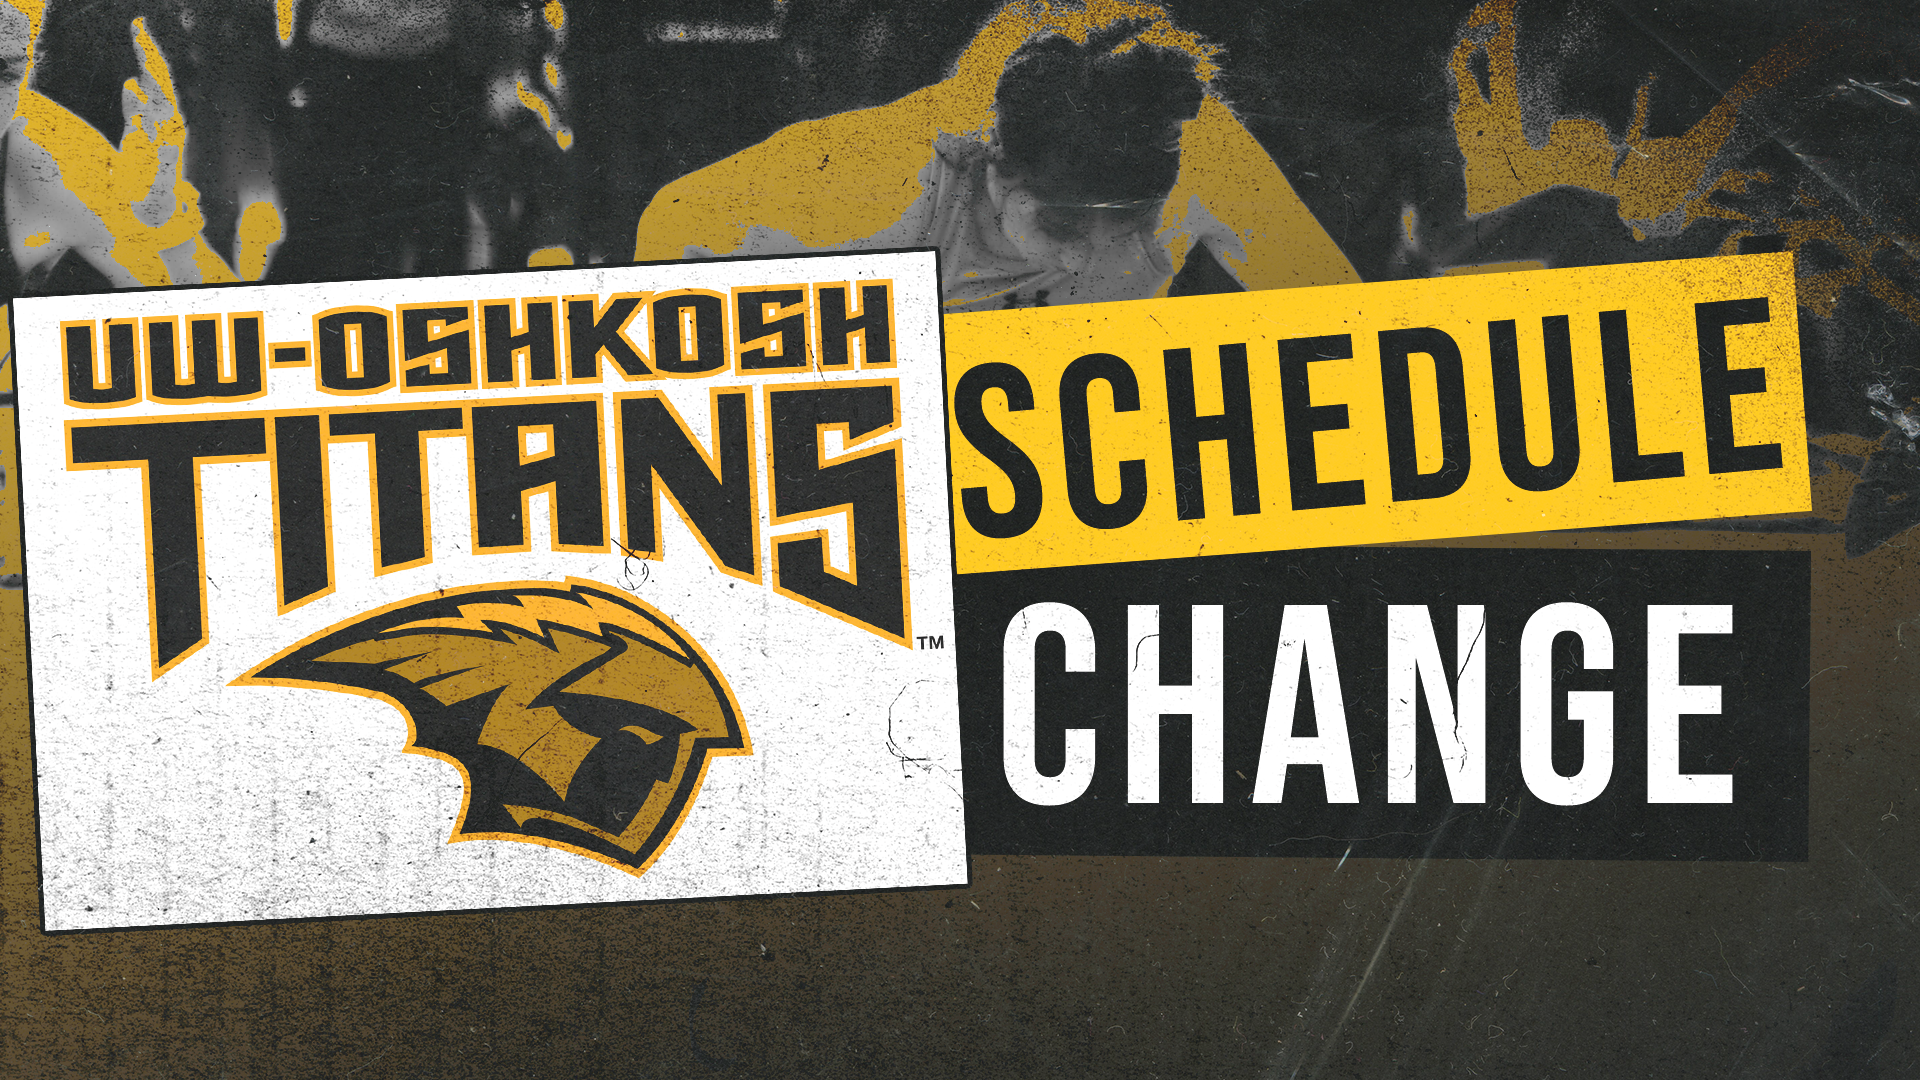 UW-Oshkosh Basketball And Swimming & Diving Schedule Changes